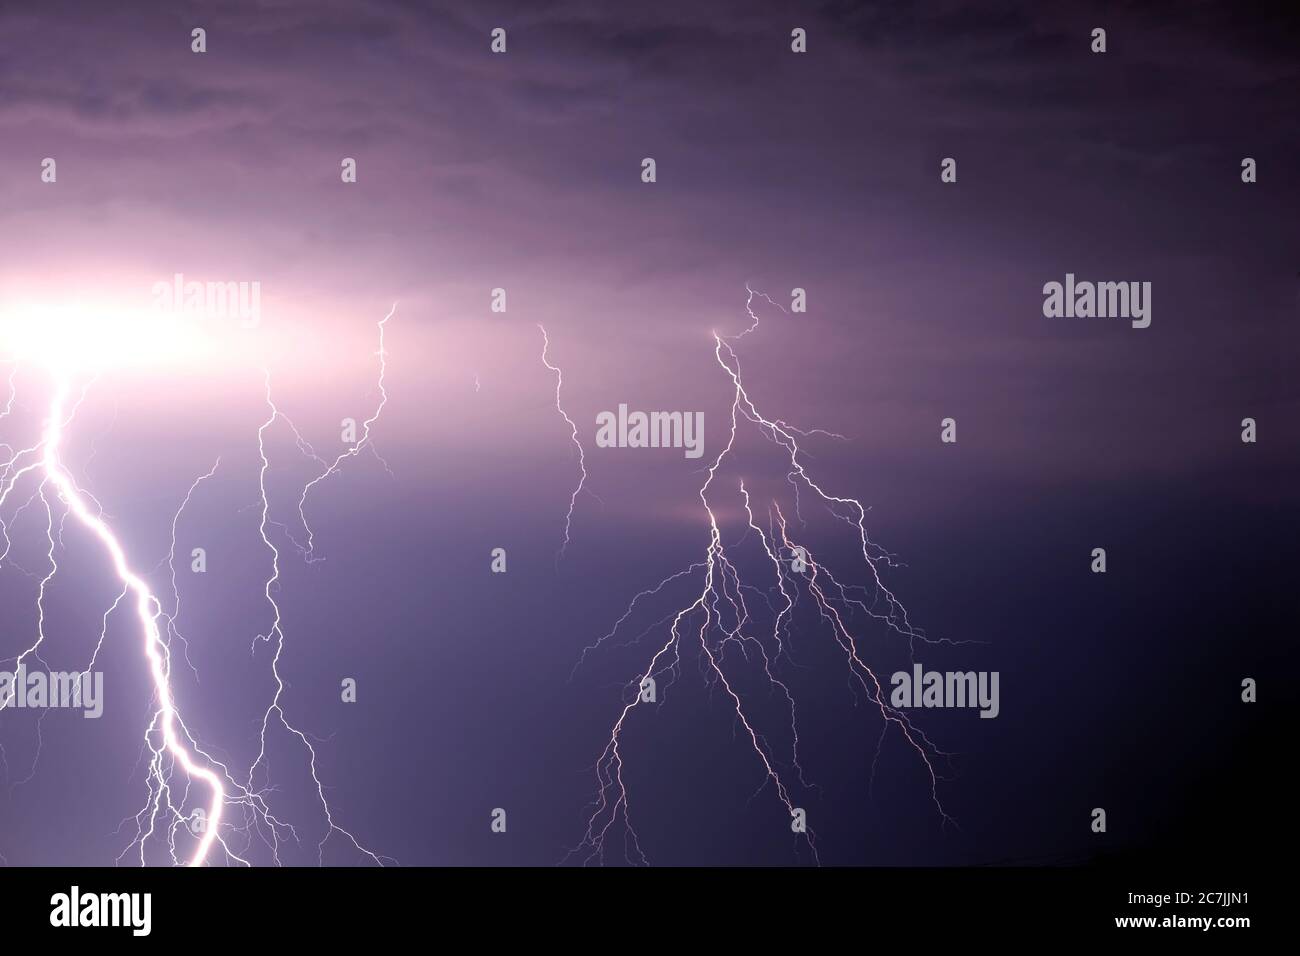 Many bright lightning discharges in the stormy sky under heavy purple rain clouds Stock Photo